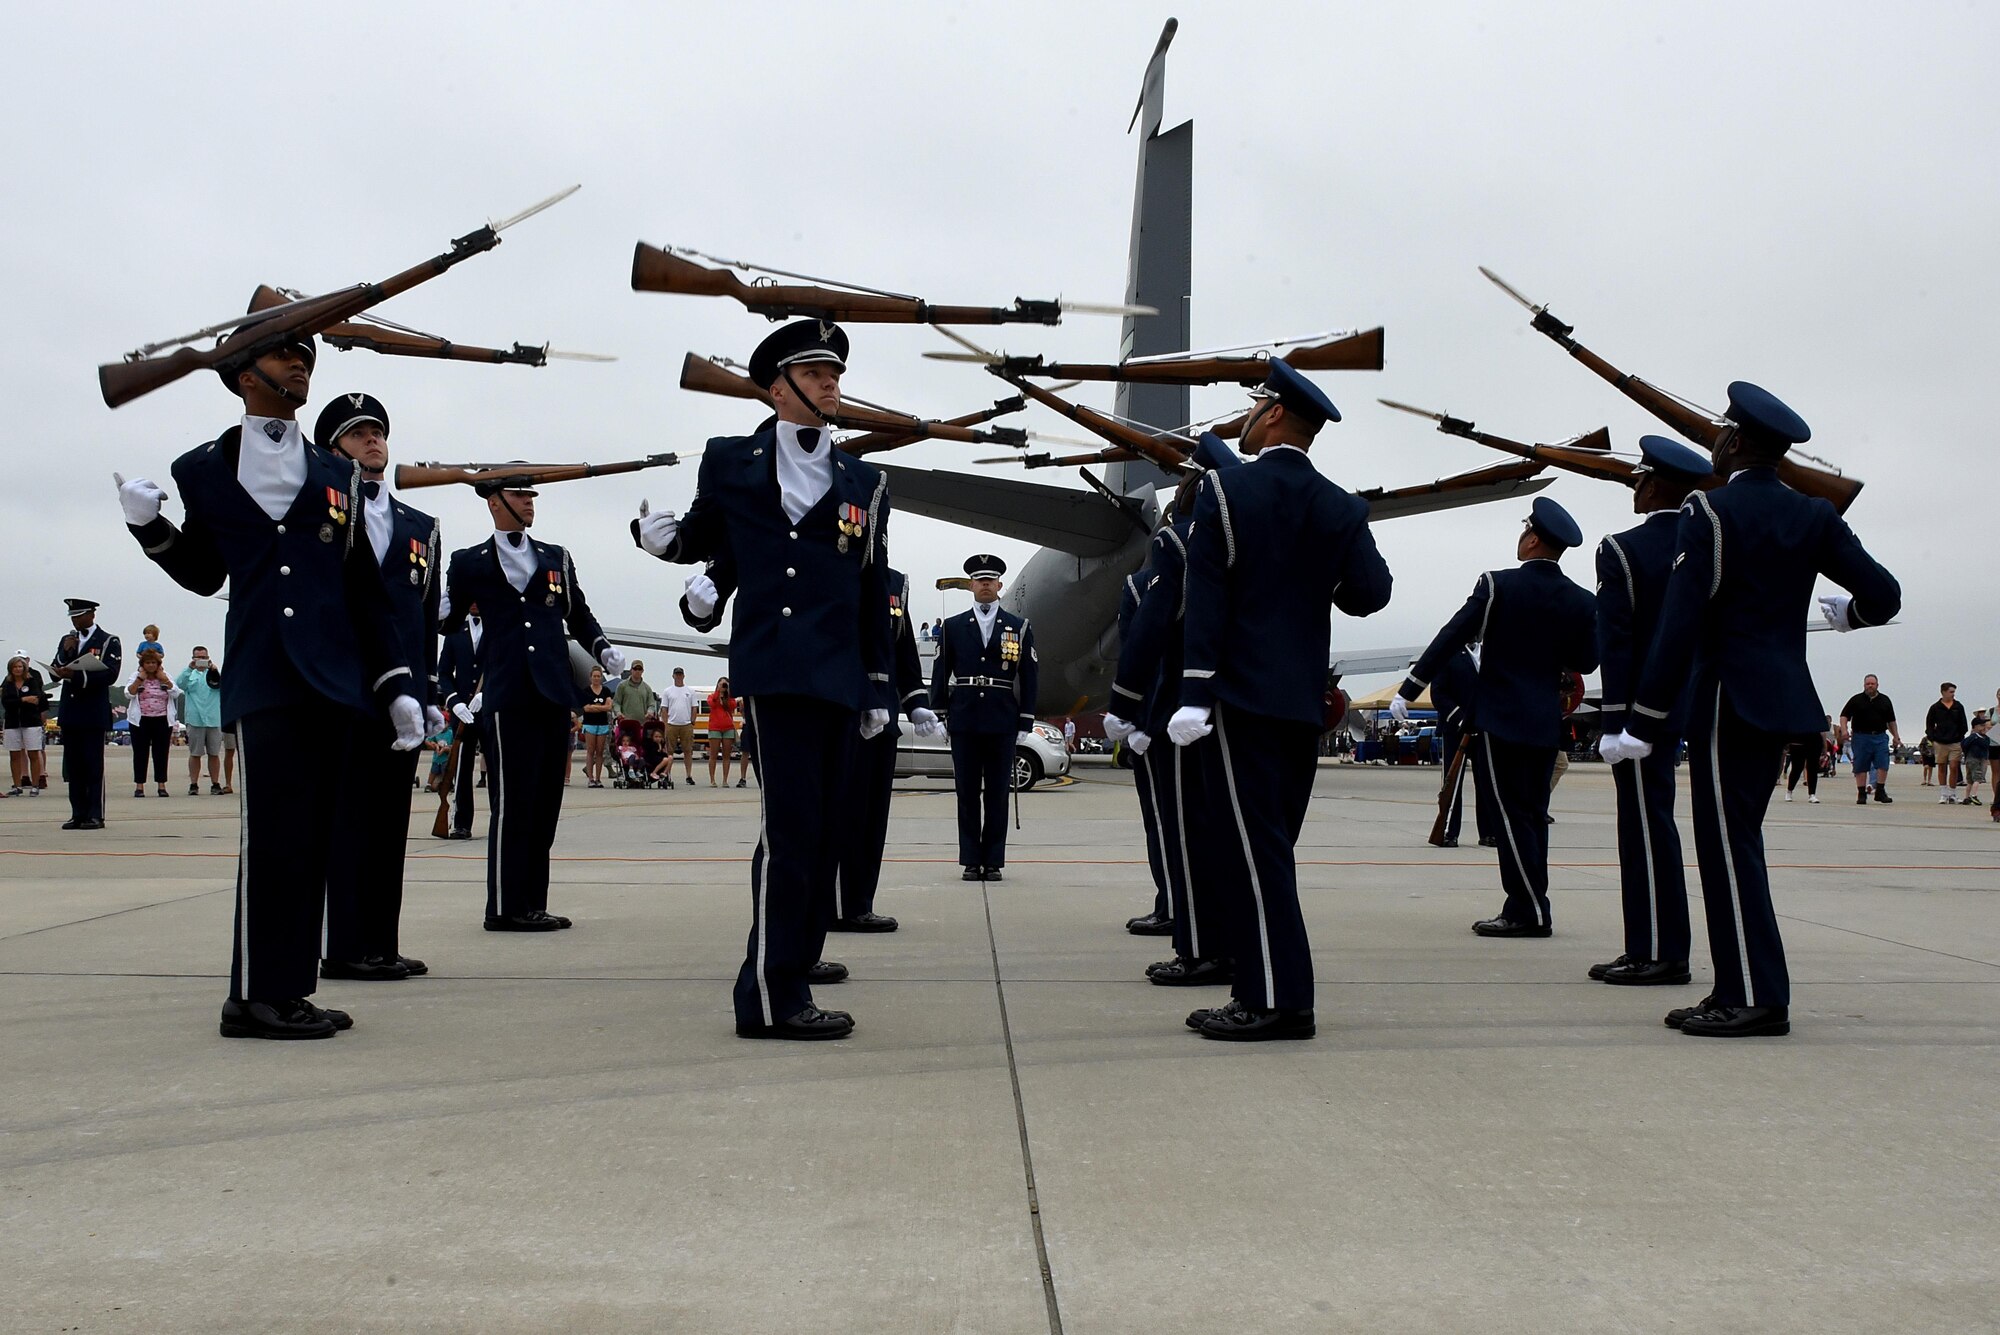 Members of the U.S. Air Force Honor Guard perform at the Wings Over Wayne Air Show, May 21, 2017, at Seymour Johnson Air Force Base, North Carolina. Seymour Johnson AFB hosted the free, two-day air show as a way to thank the public and local community for their ongoing support of the base’s missions. (U.S. Air Force photo by Airman 1st Class Victoria Boyton)